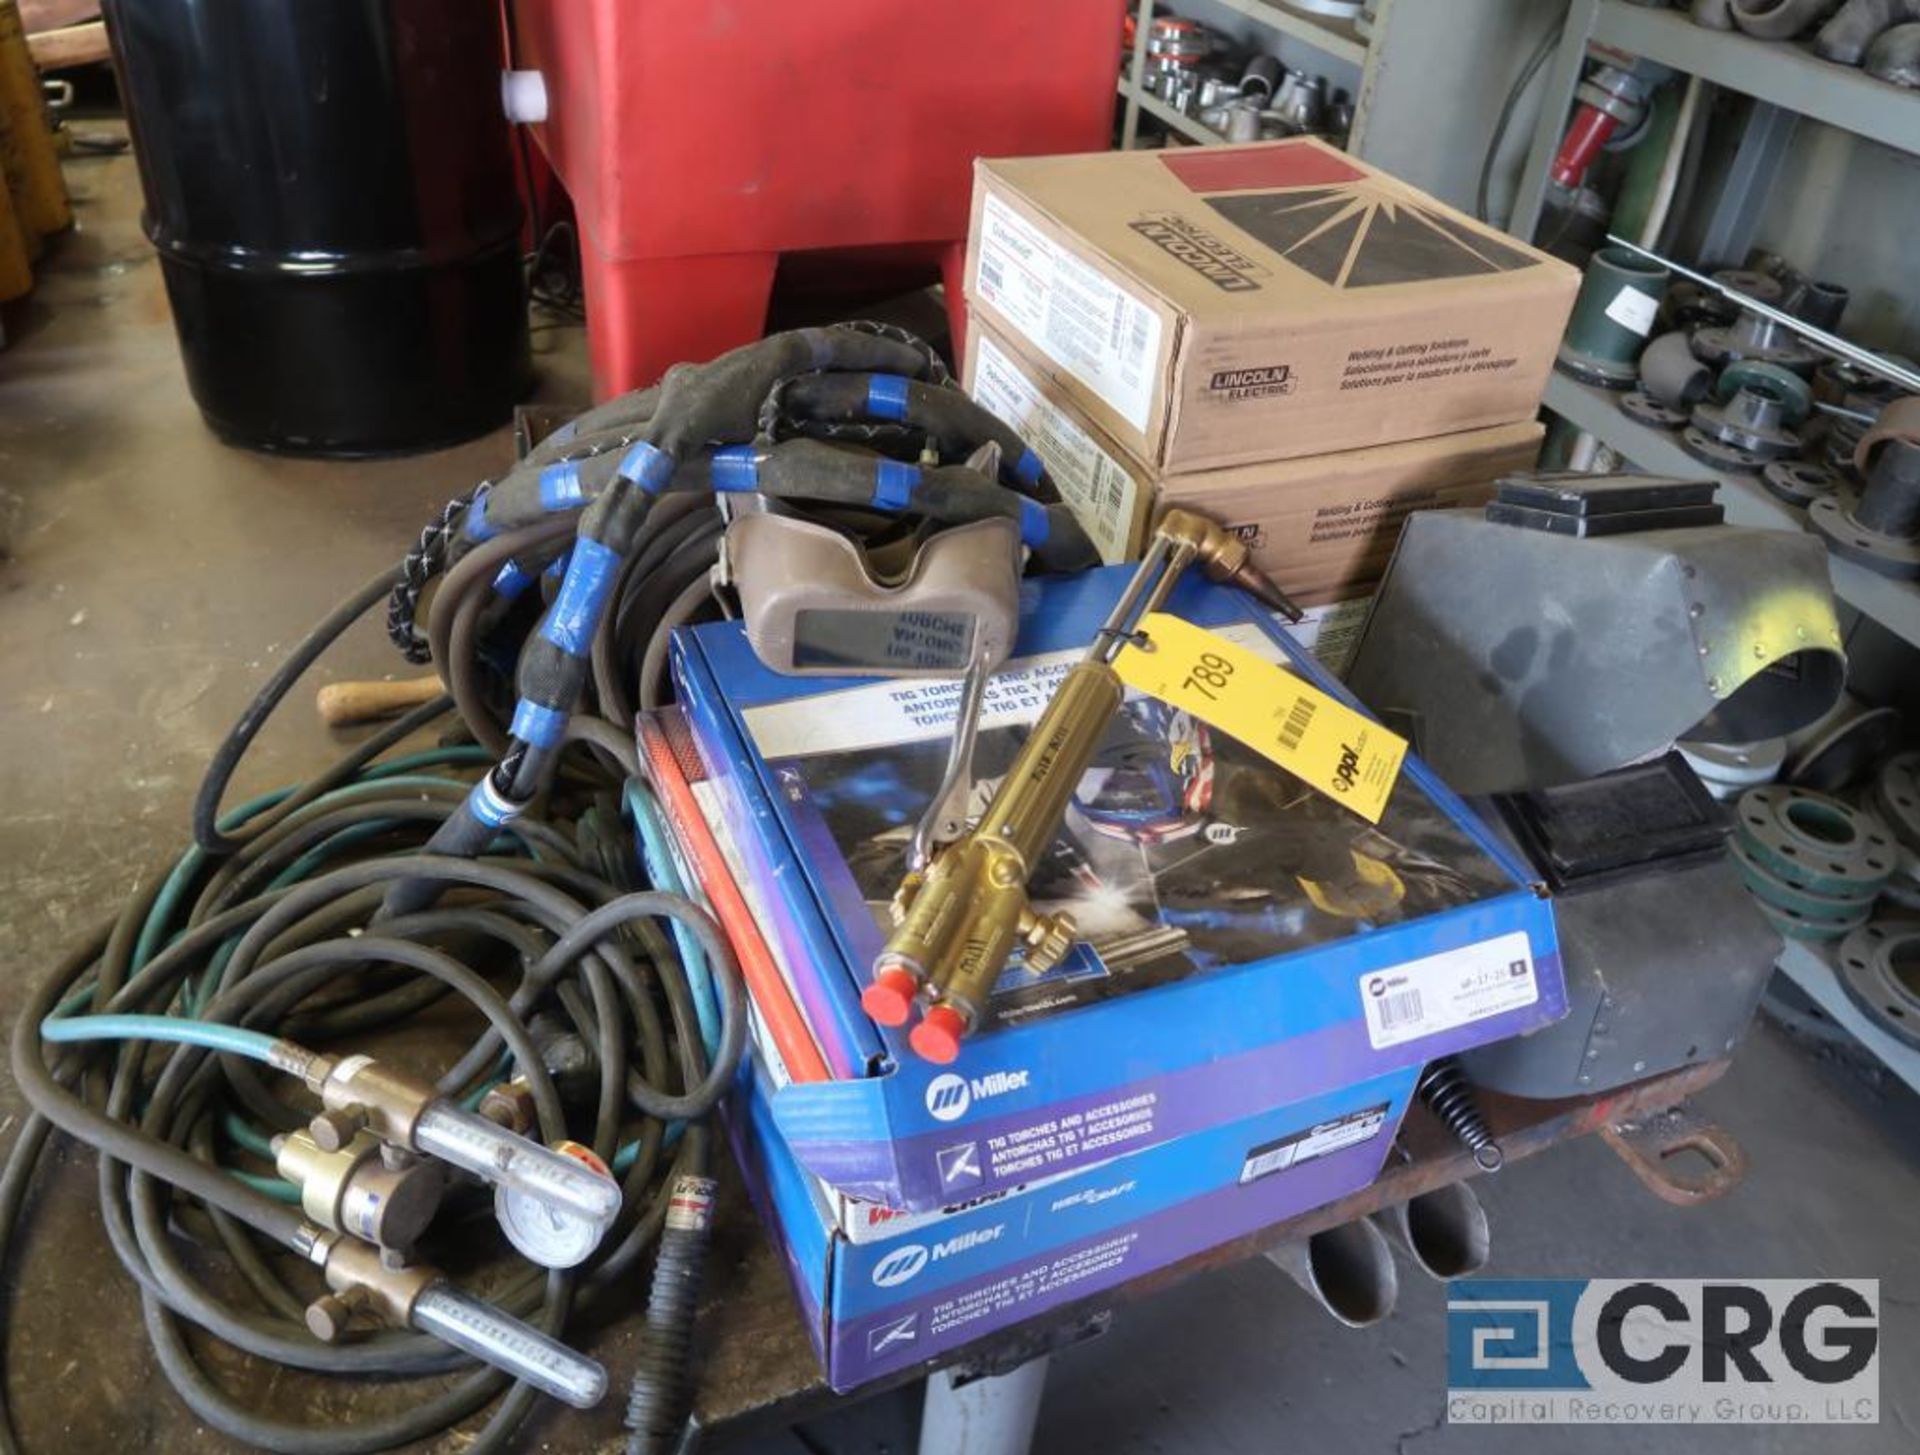 Lot of assorted welding supplies including face shields, jackets, gauges, hose, and weld wire (